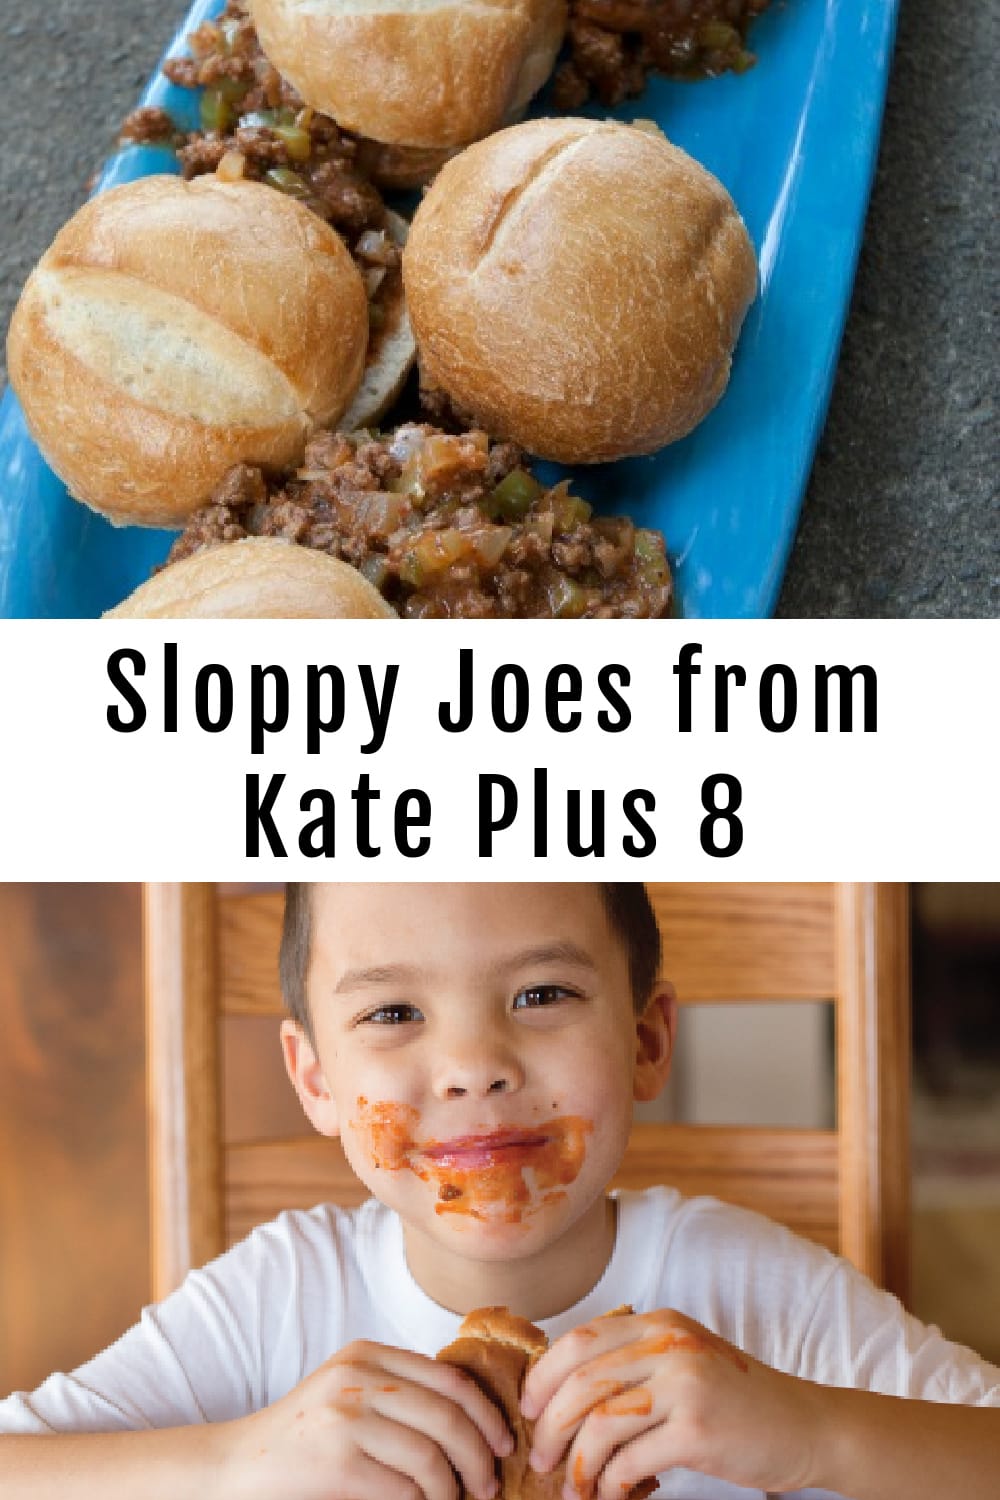 Photo collage of Sloppy Joes from Kate Plus 8 with Joel Gosselin eating one